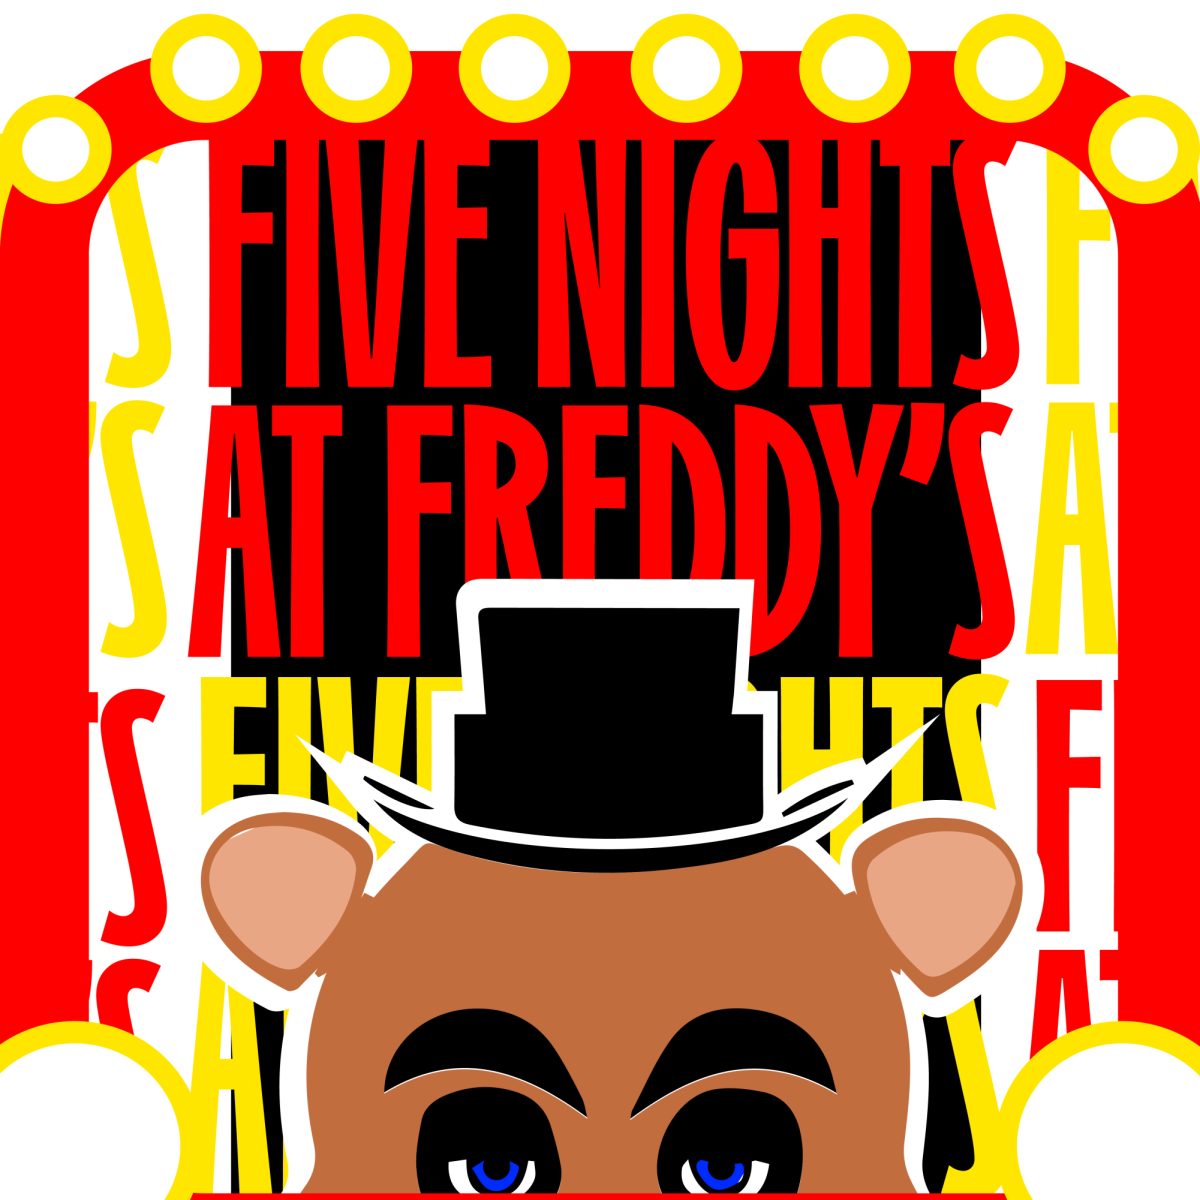 The+Five+Nights+at+Freddys+movie+has+been+overly+criticized